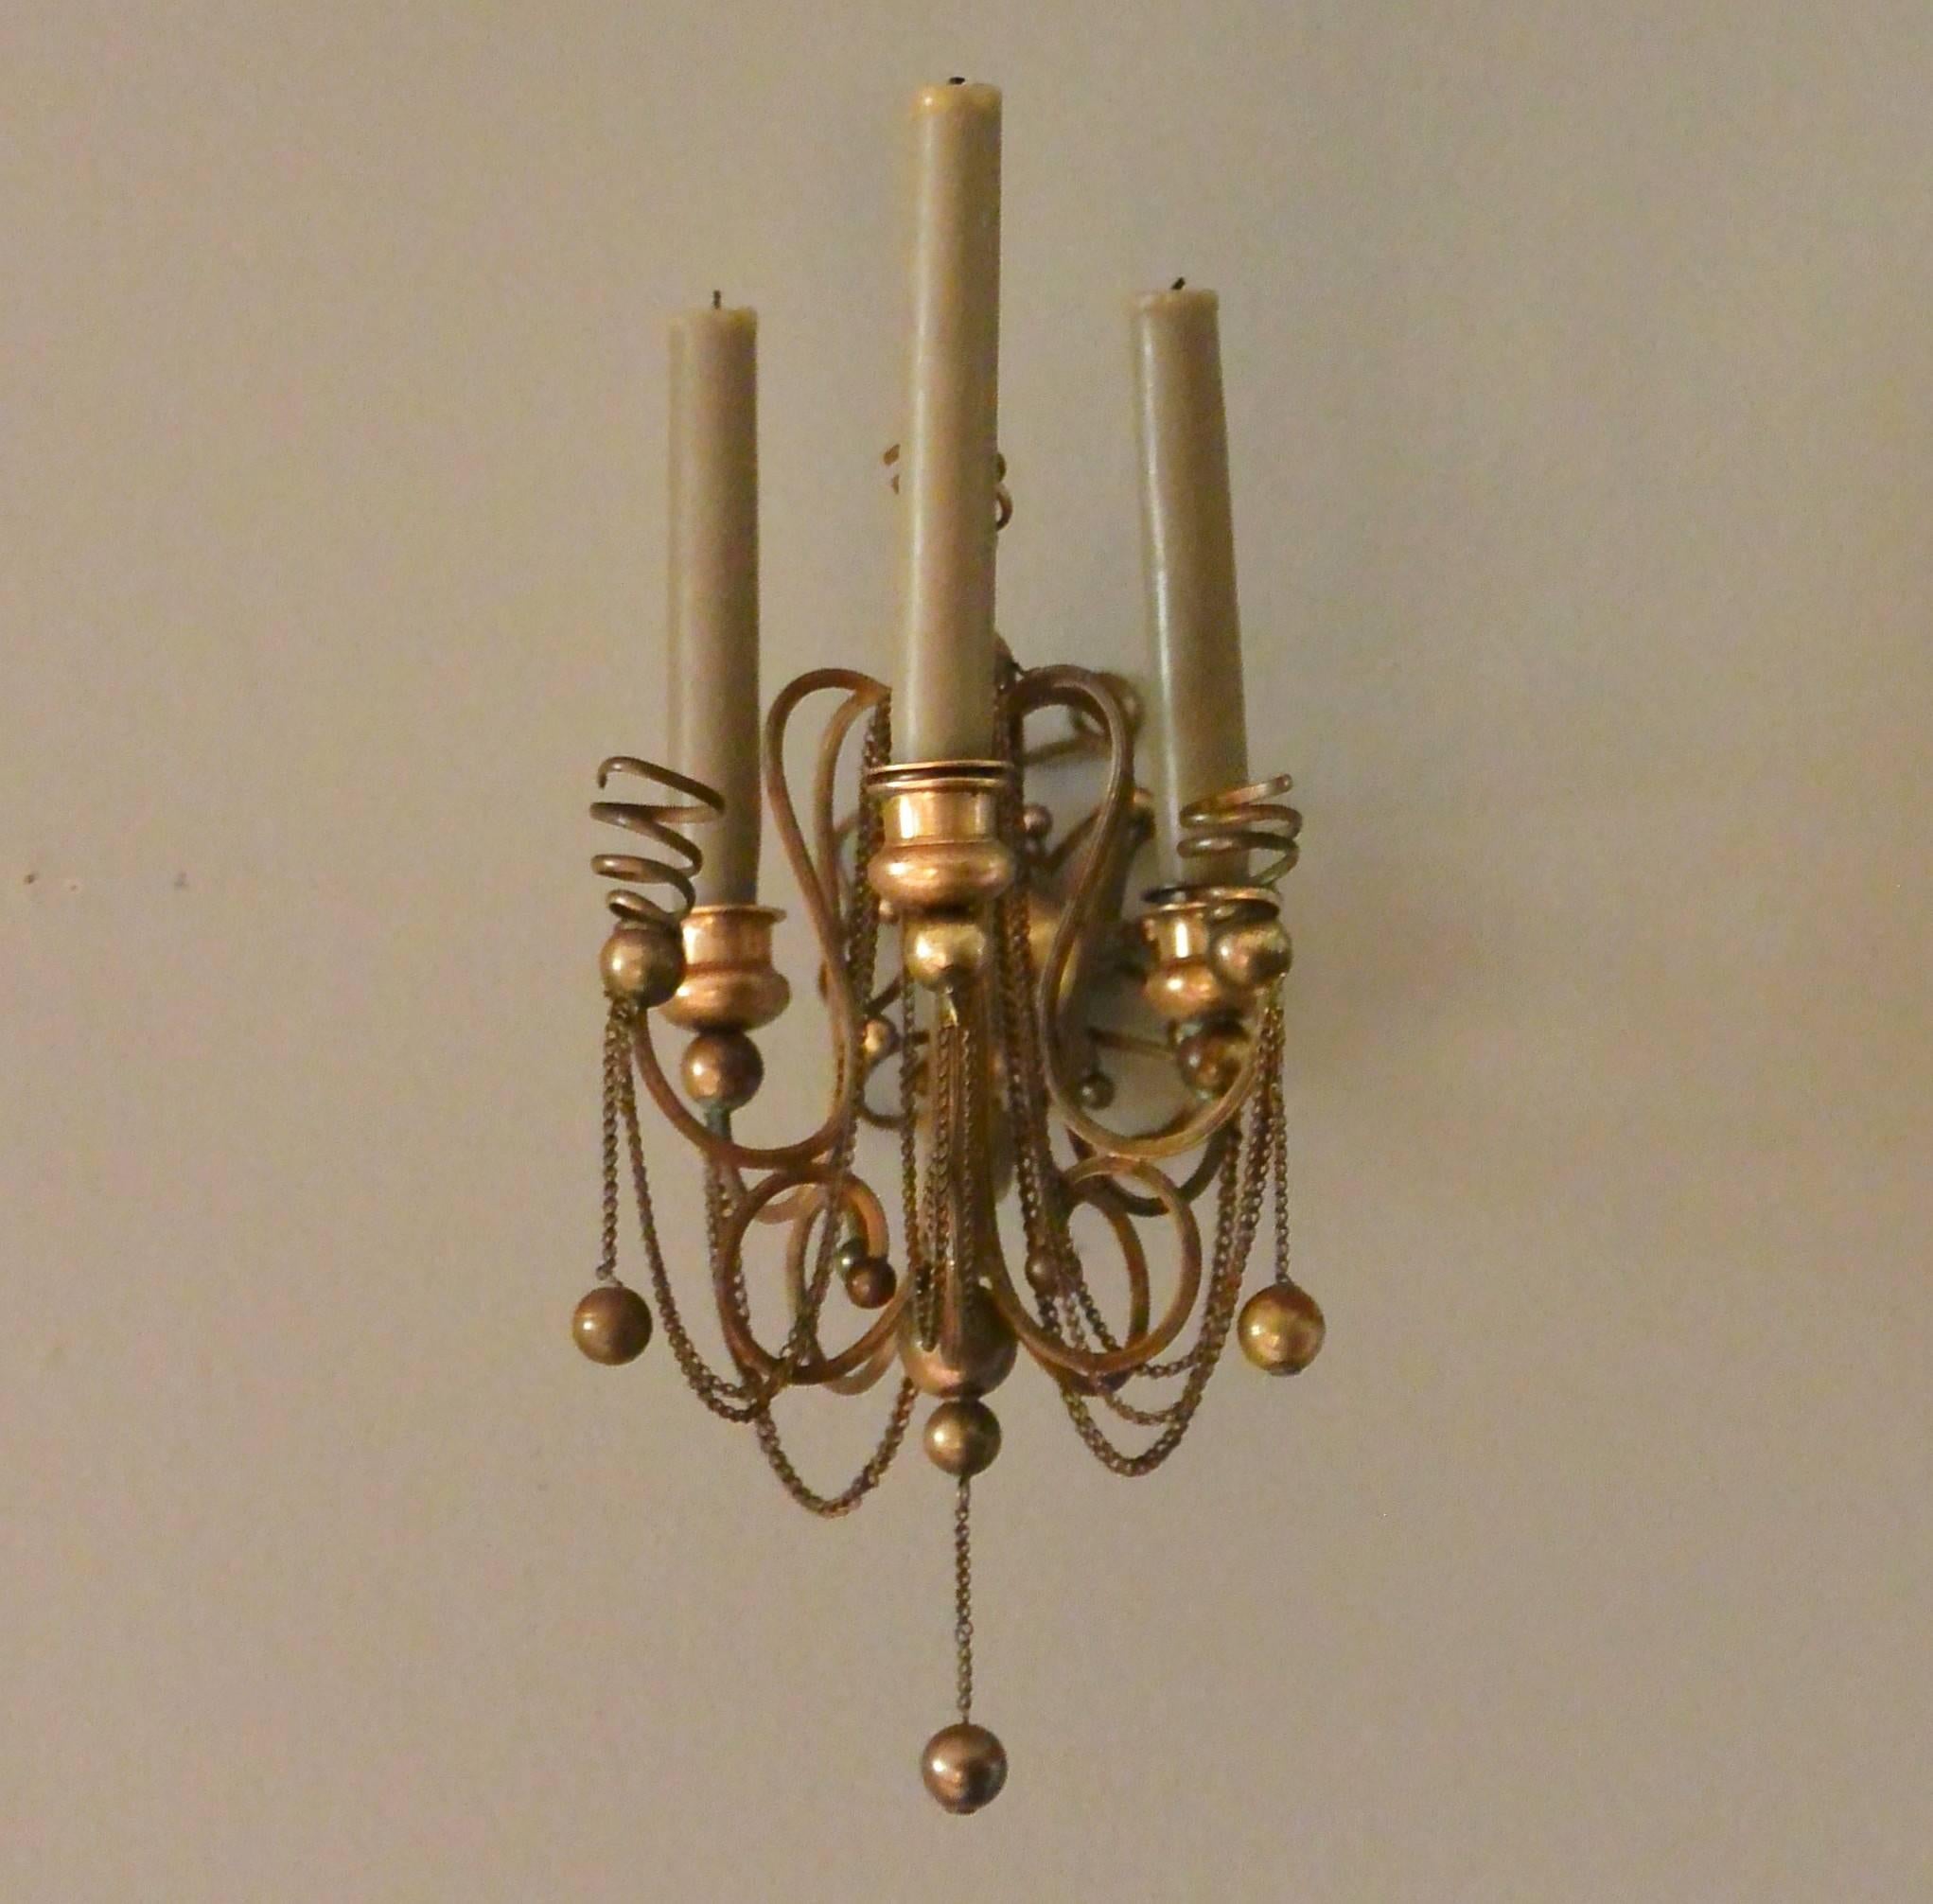 Continental brass ball and chain candle sconces.  Possibly Viennese three-light brass ball and chain sconces, Europe, circa 1880s.
Dimension: 6